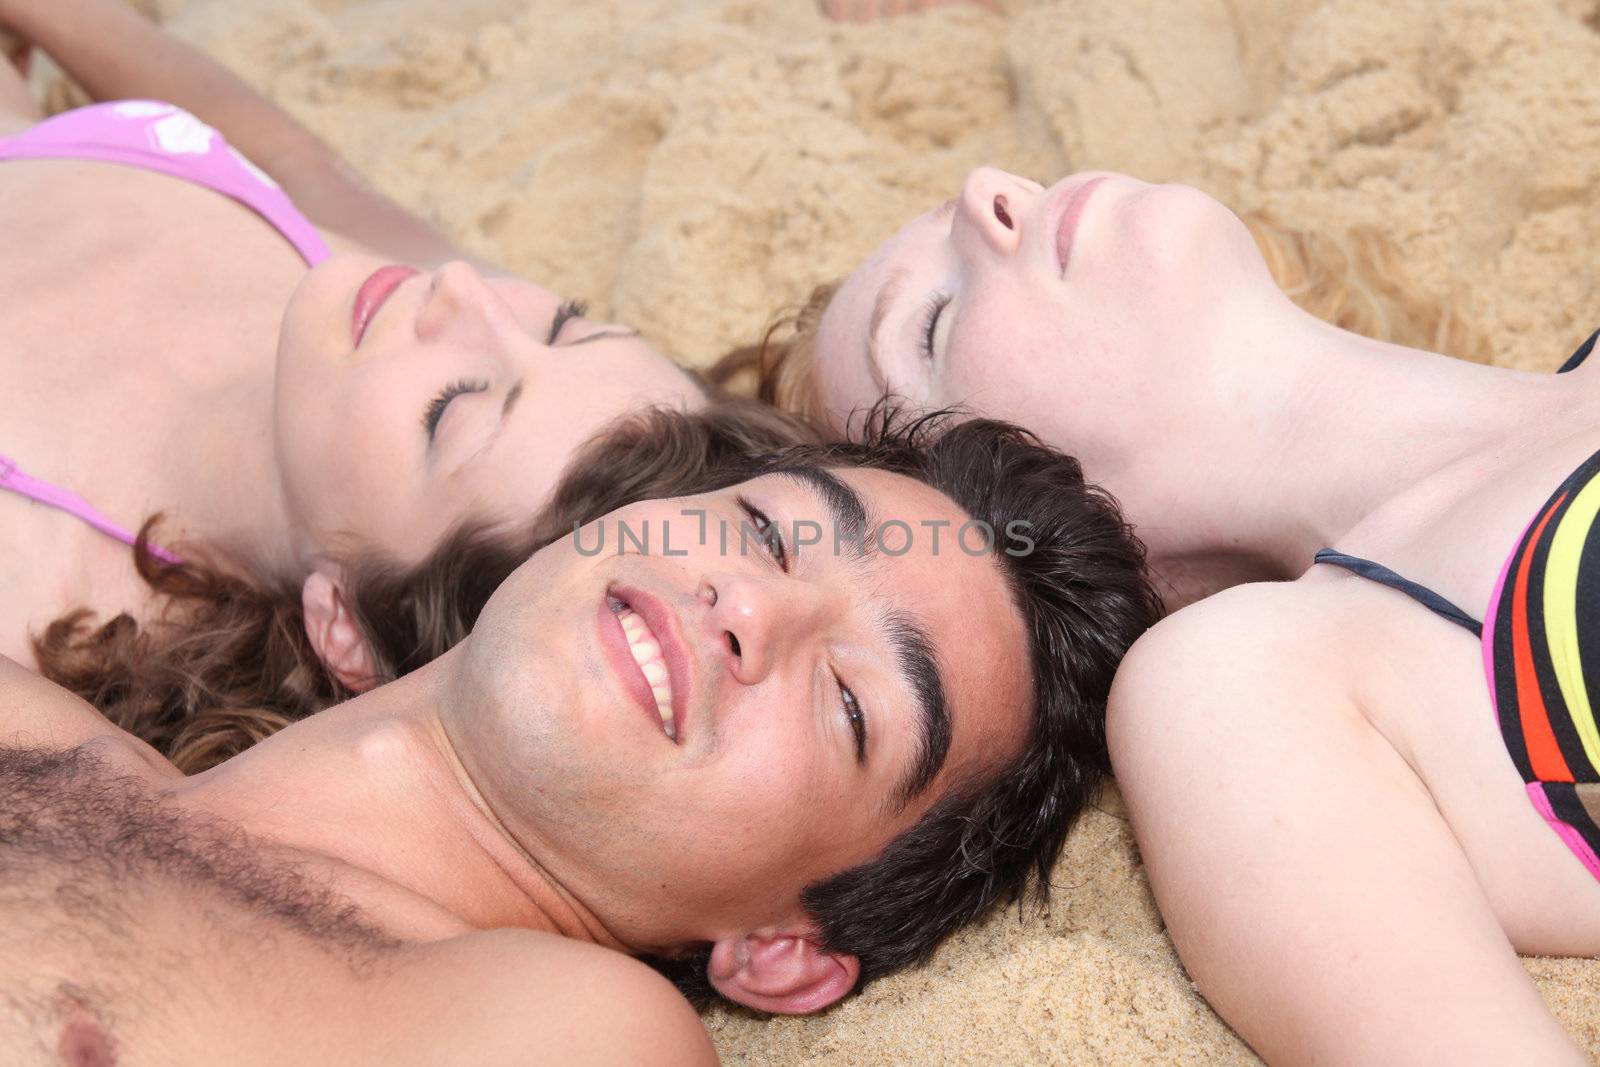 Three young people lying in the sand